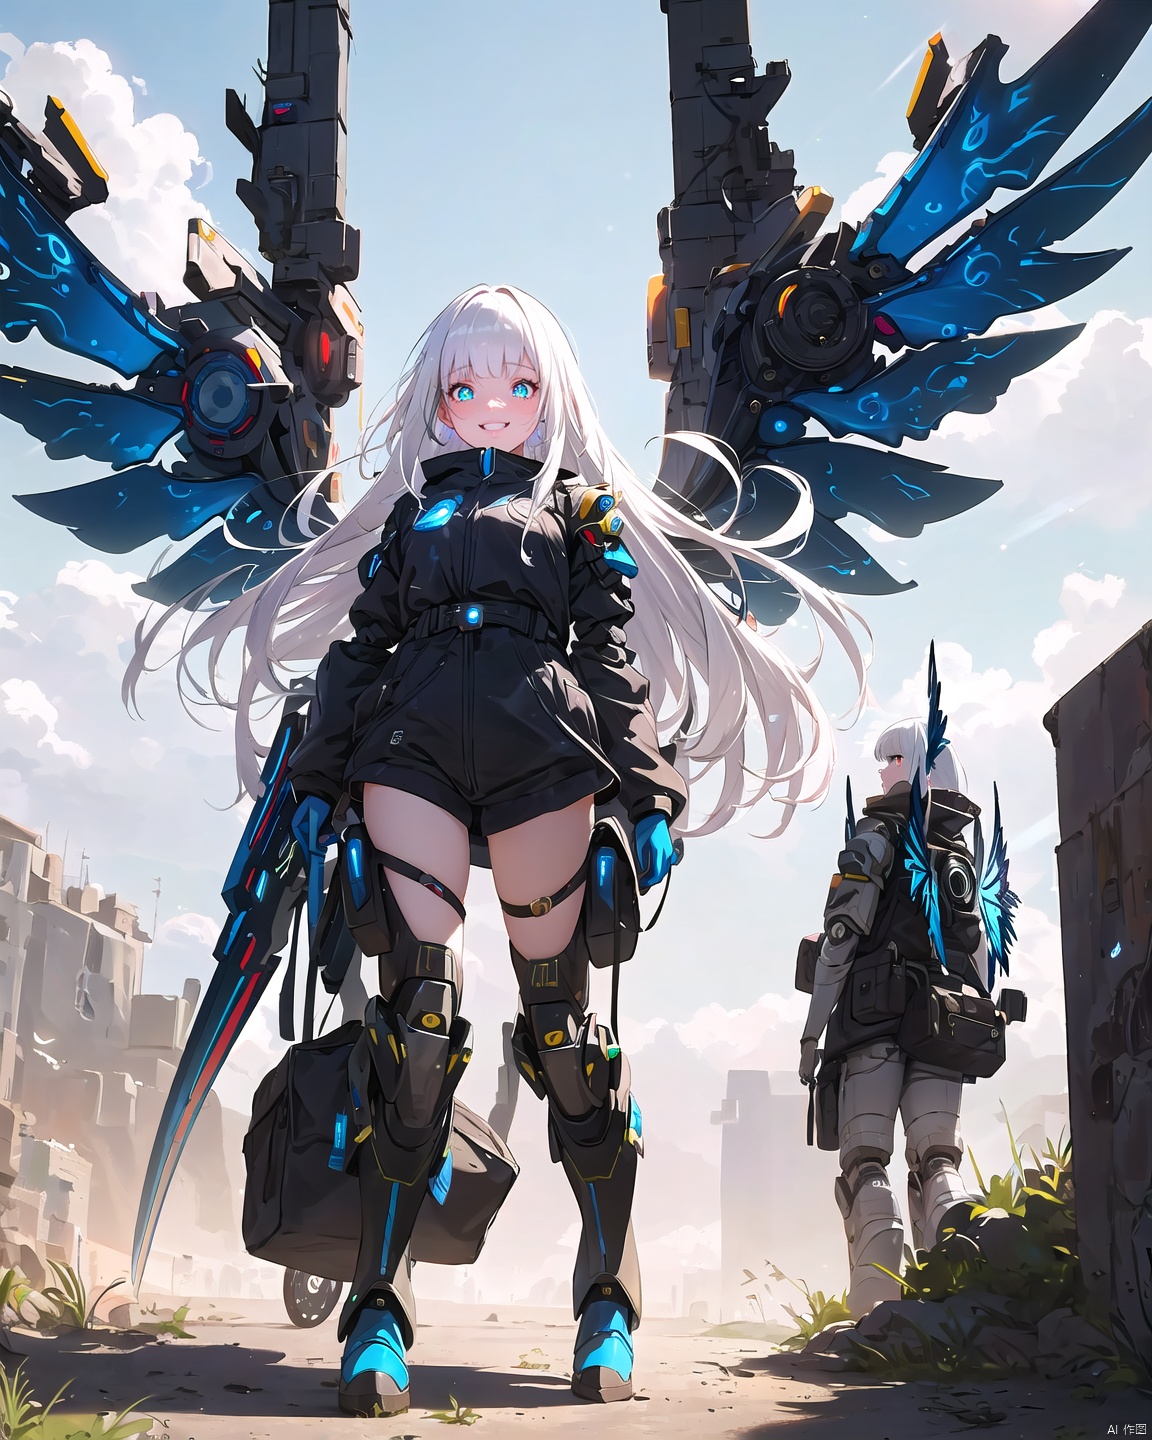 1 18-year-old beautiful girl +(detailed face)+ white hair + long hair + bangs + sunny and cheerful + blue pupils + mechanical legs + boots + wings Apocalyptic + sci-fi mechanical wings with fan +More details + color + lens flare,<lora:EMS-273028-EMS:0.800000>